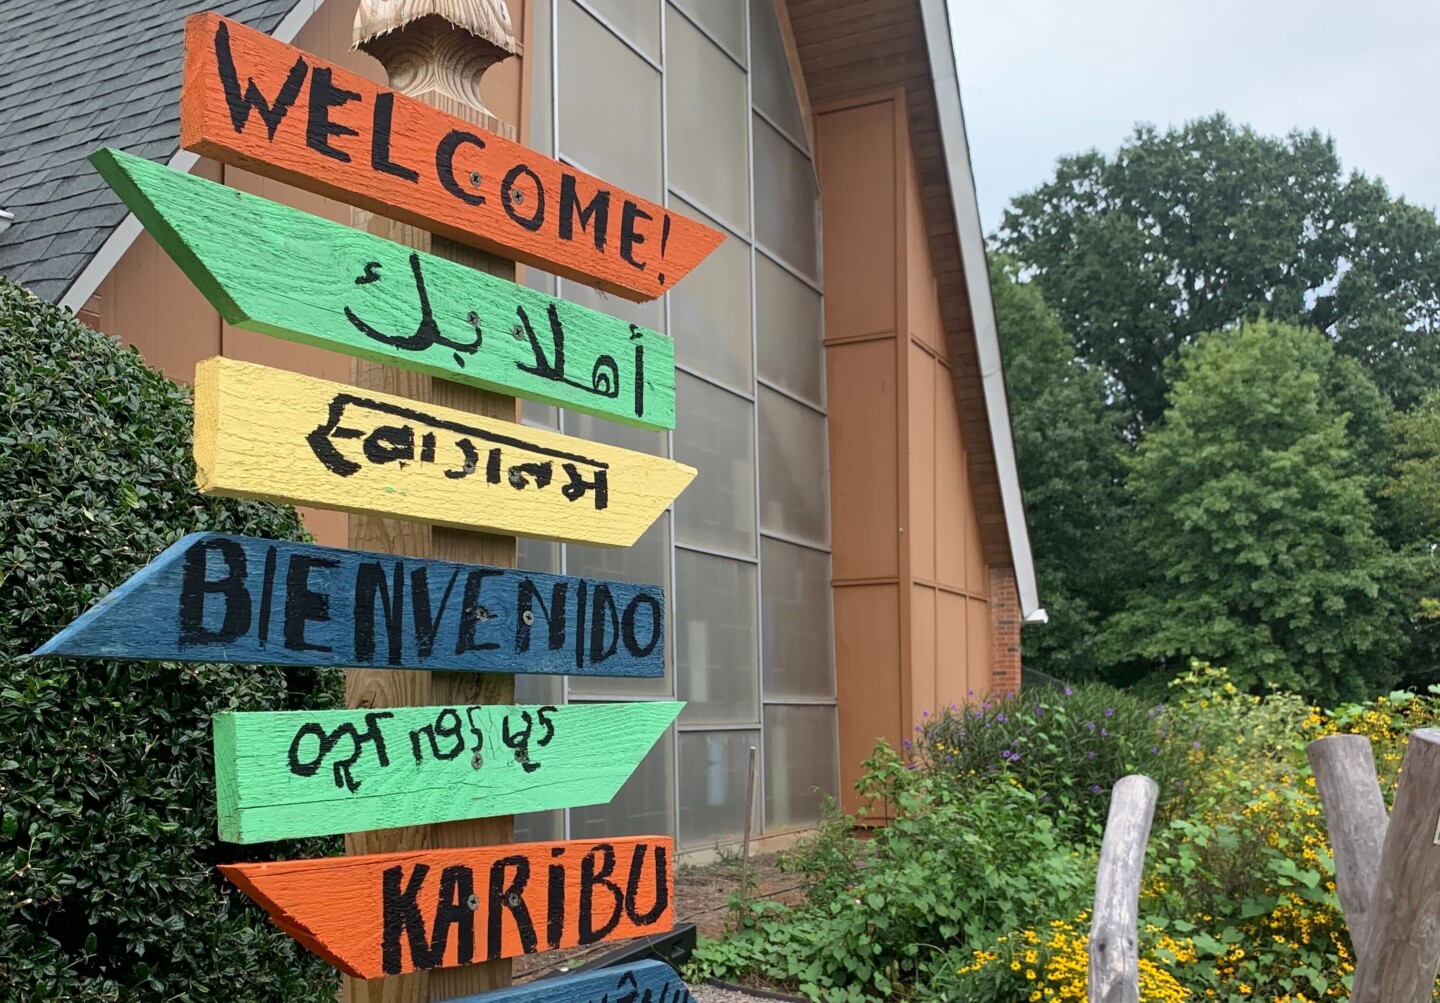 Painted sign that says "Welcome" in several languages